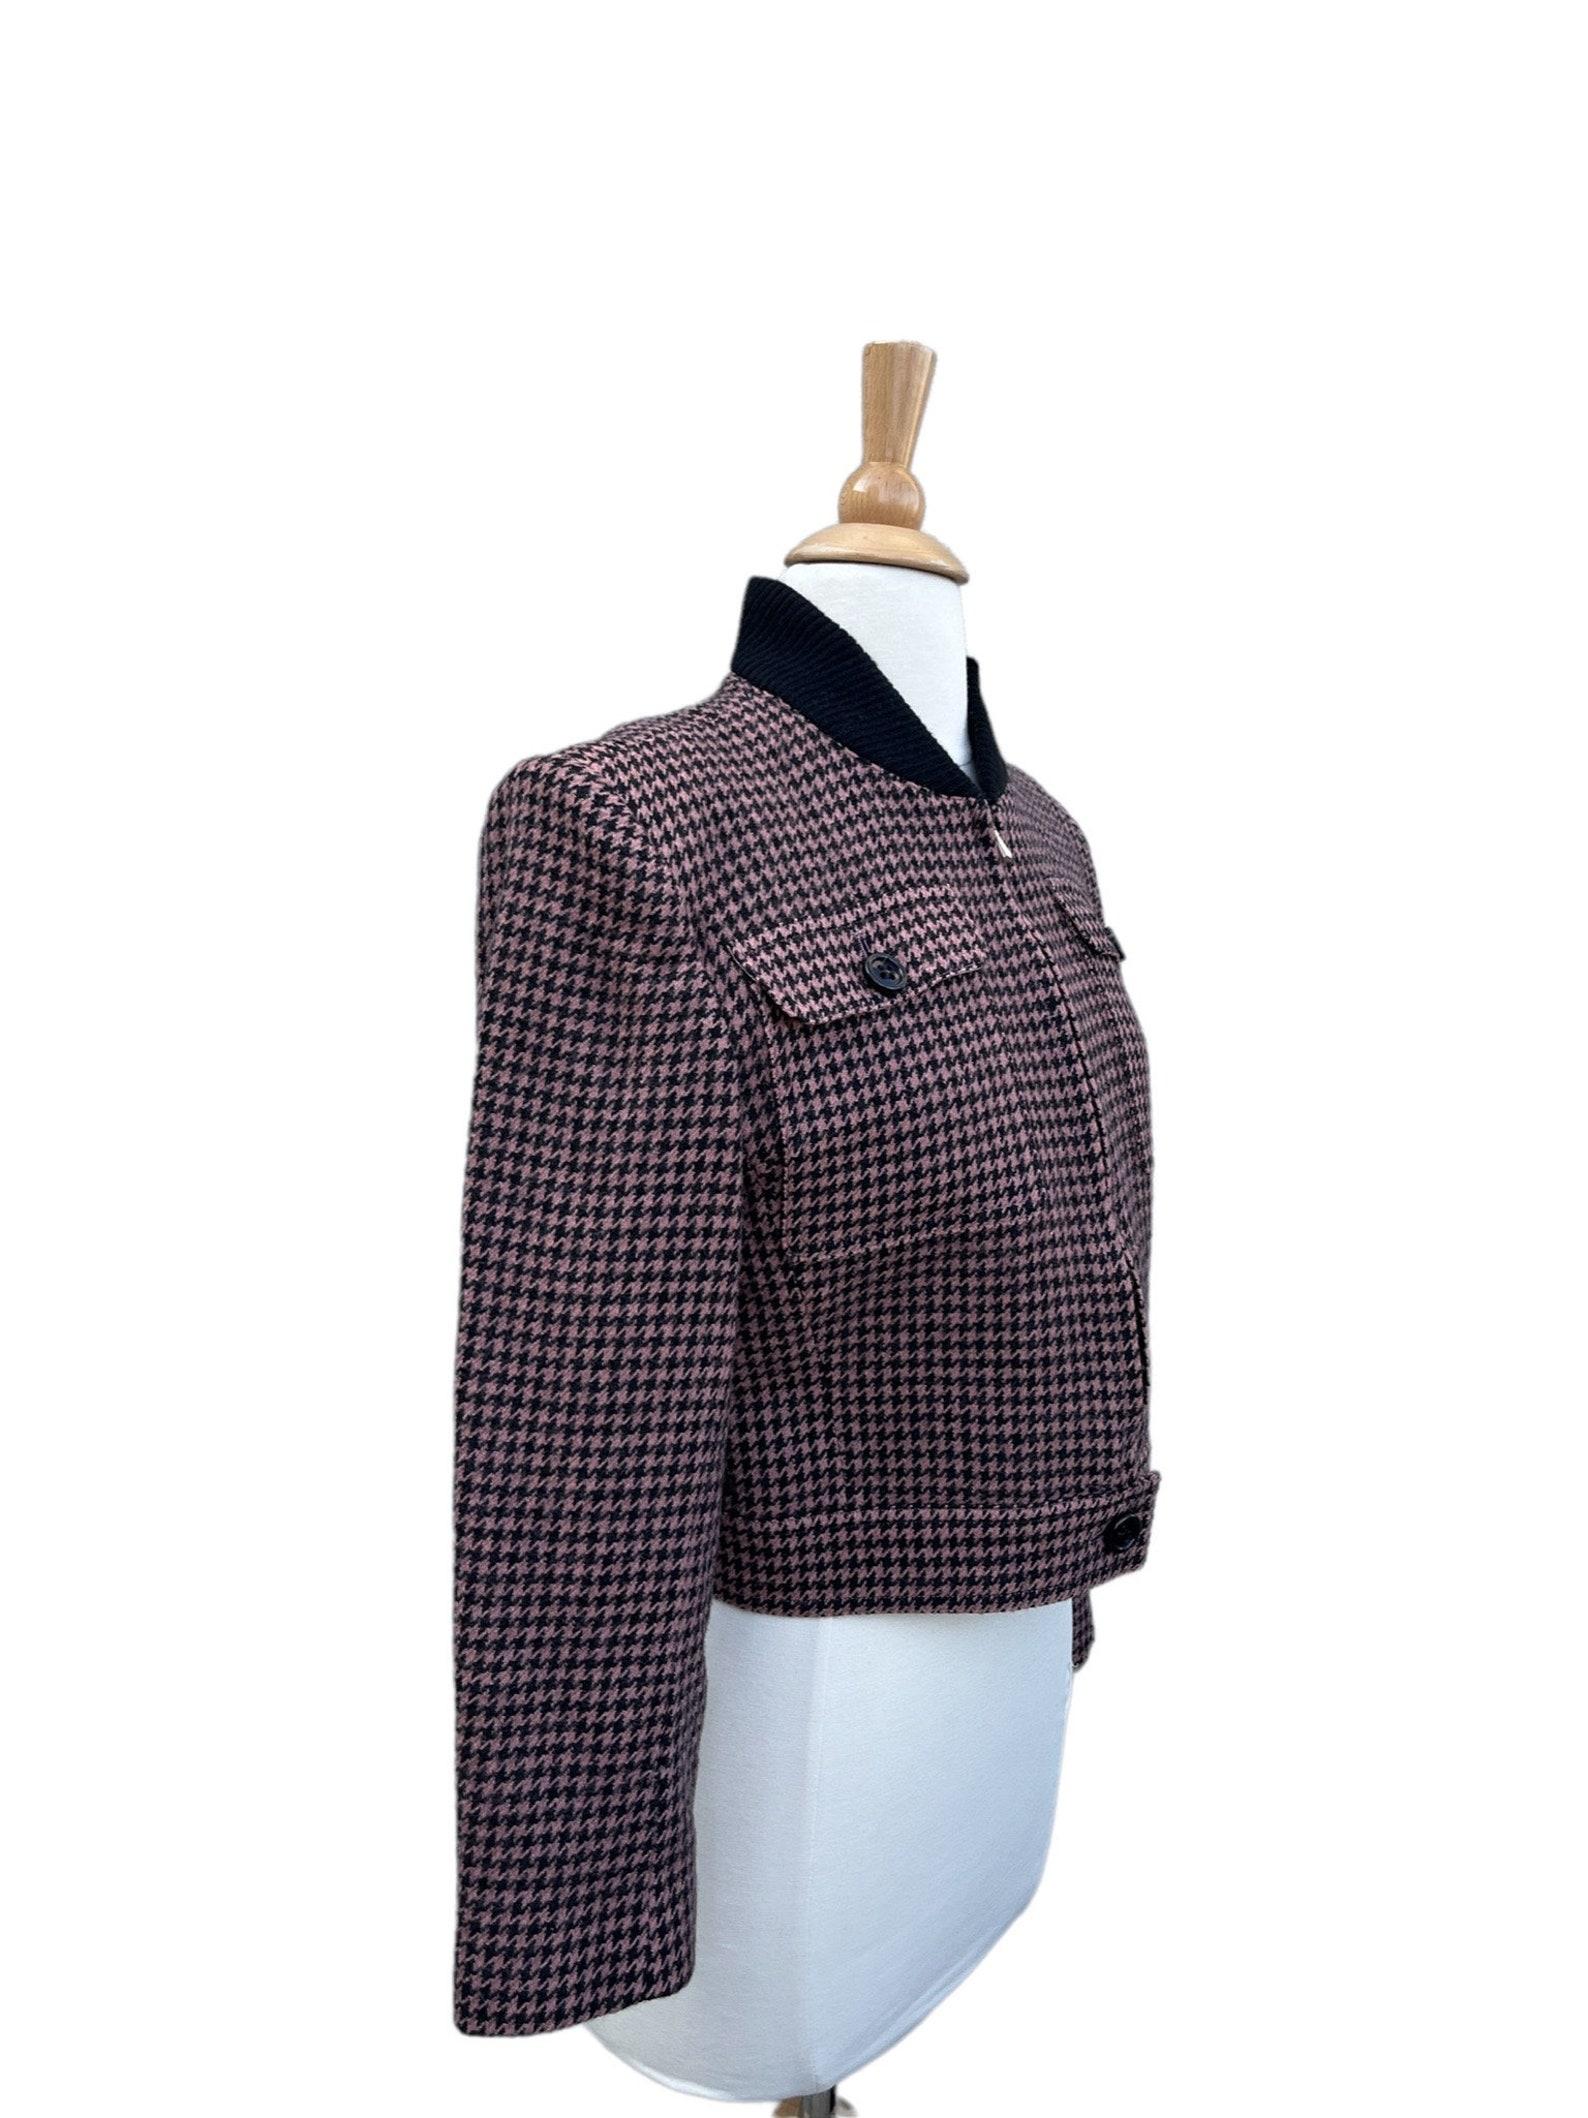 Women's Guy Laroche Houndstooth Jacket, Circa 1980s For Sale